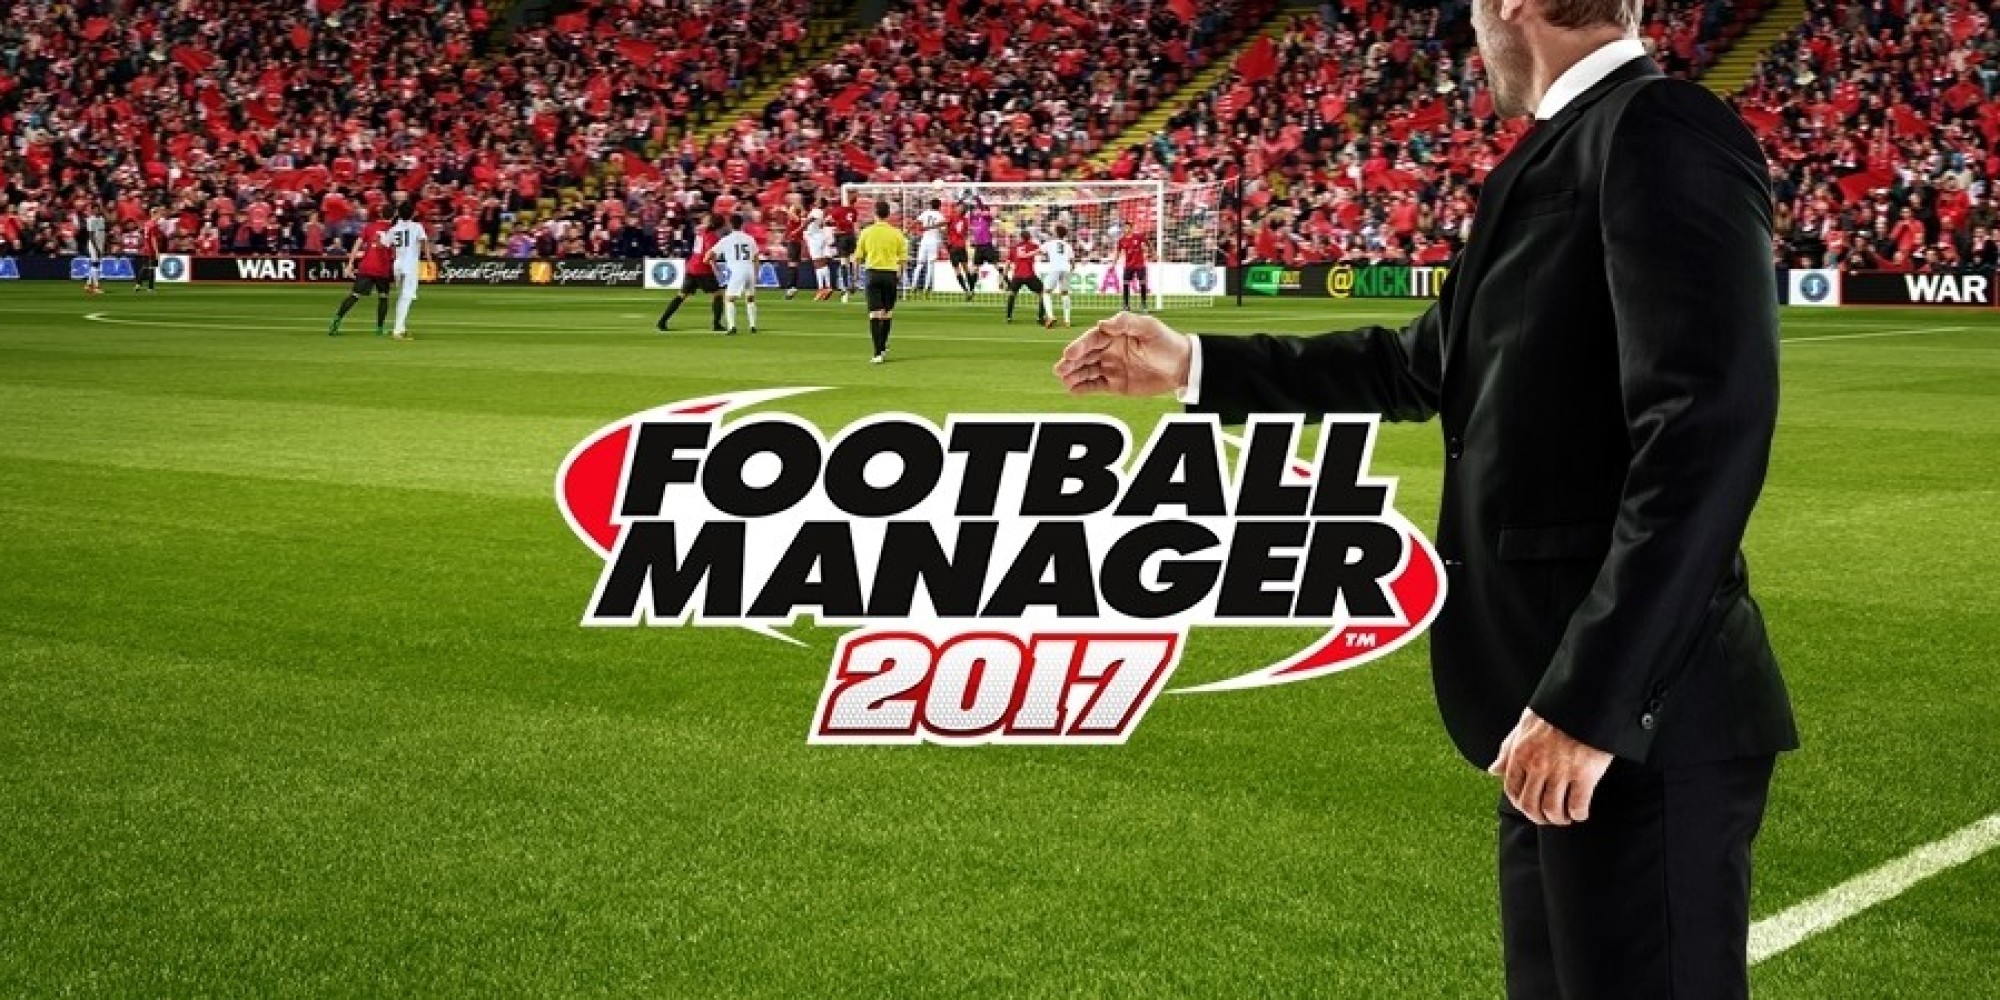 A computer generated image of a football manager stood on the sideline of a football pitch with a 